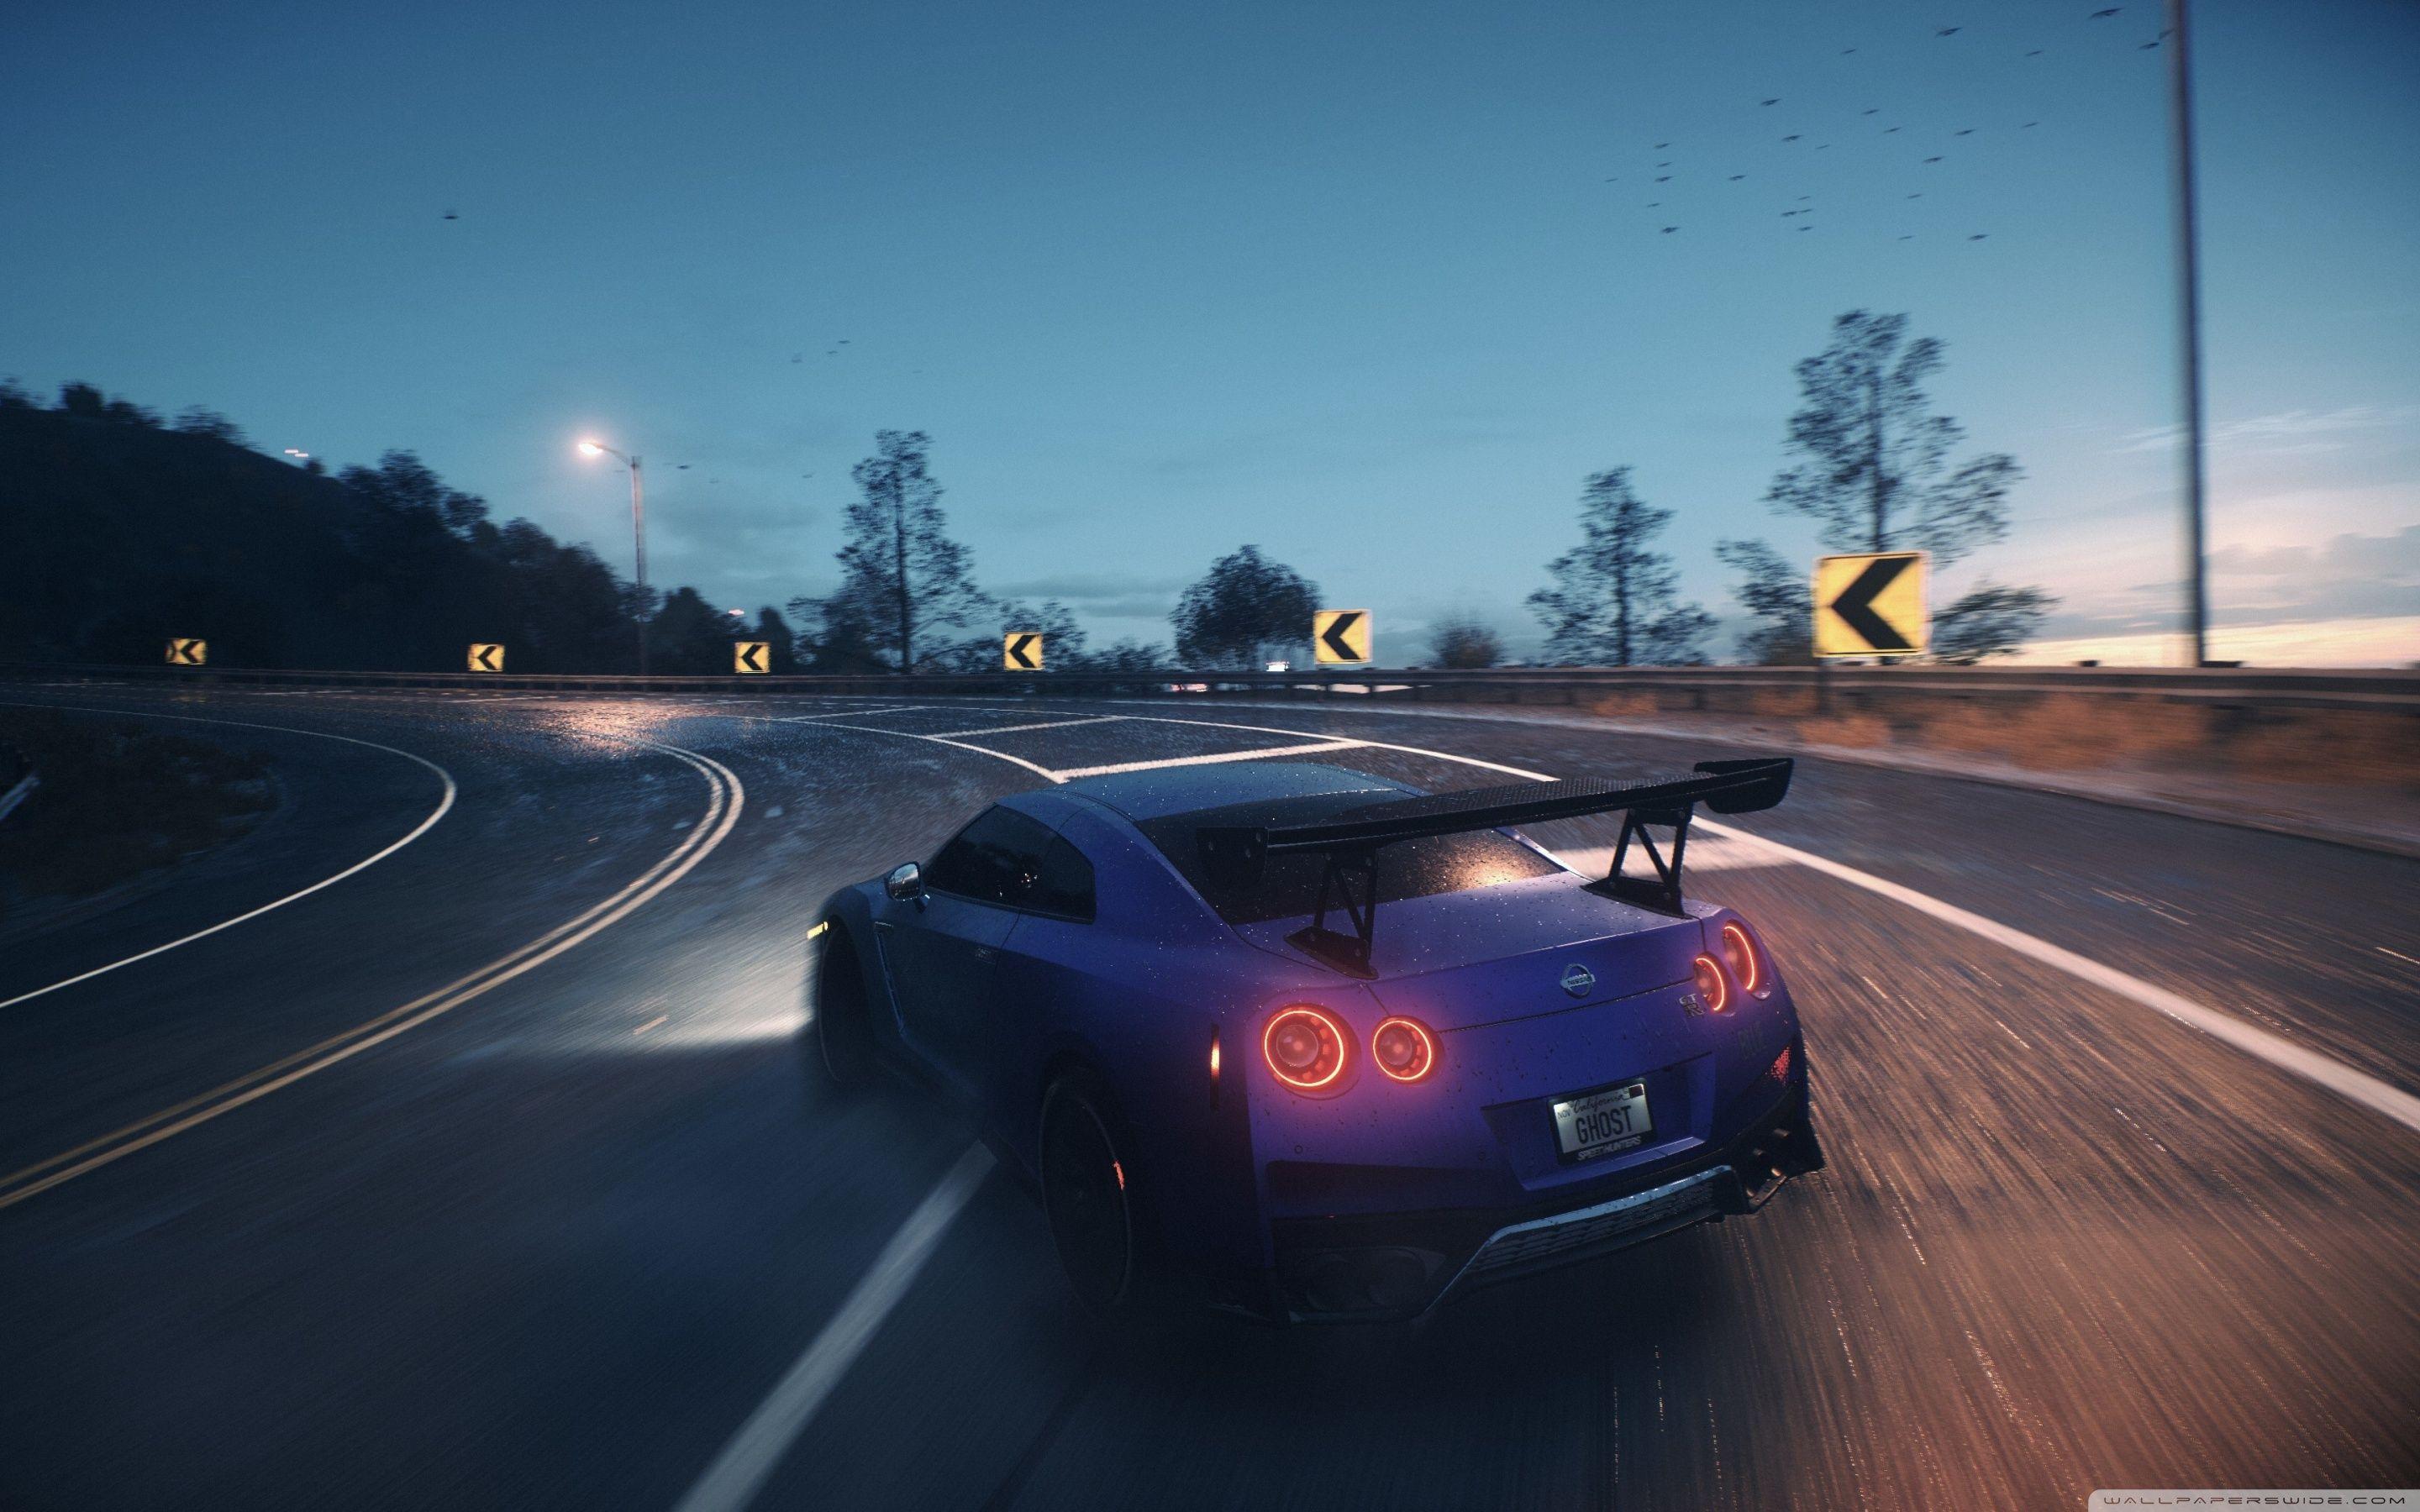 need for speed 2015 pc mega